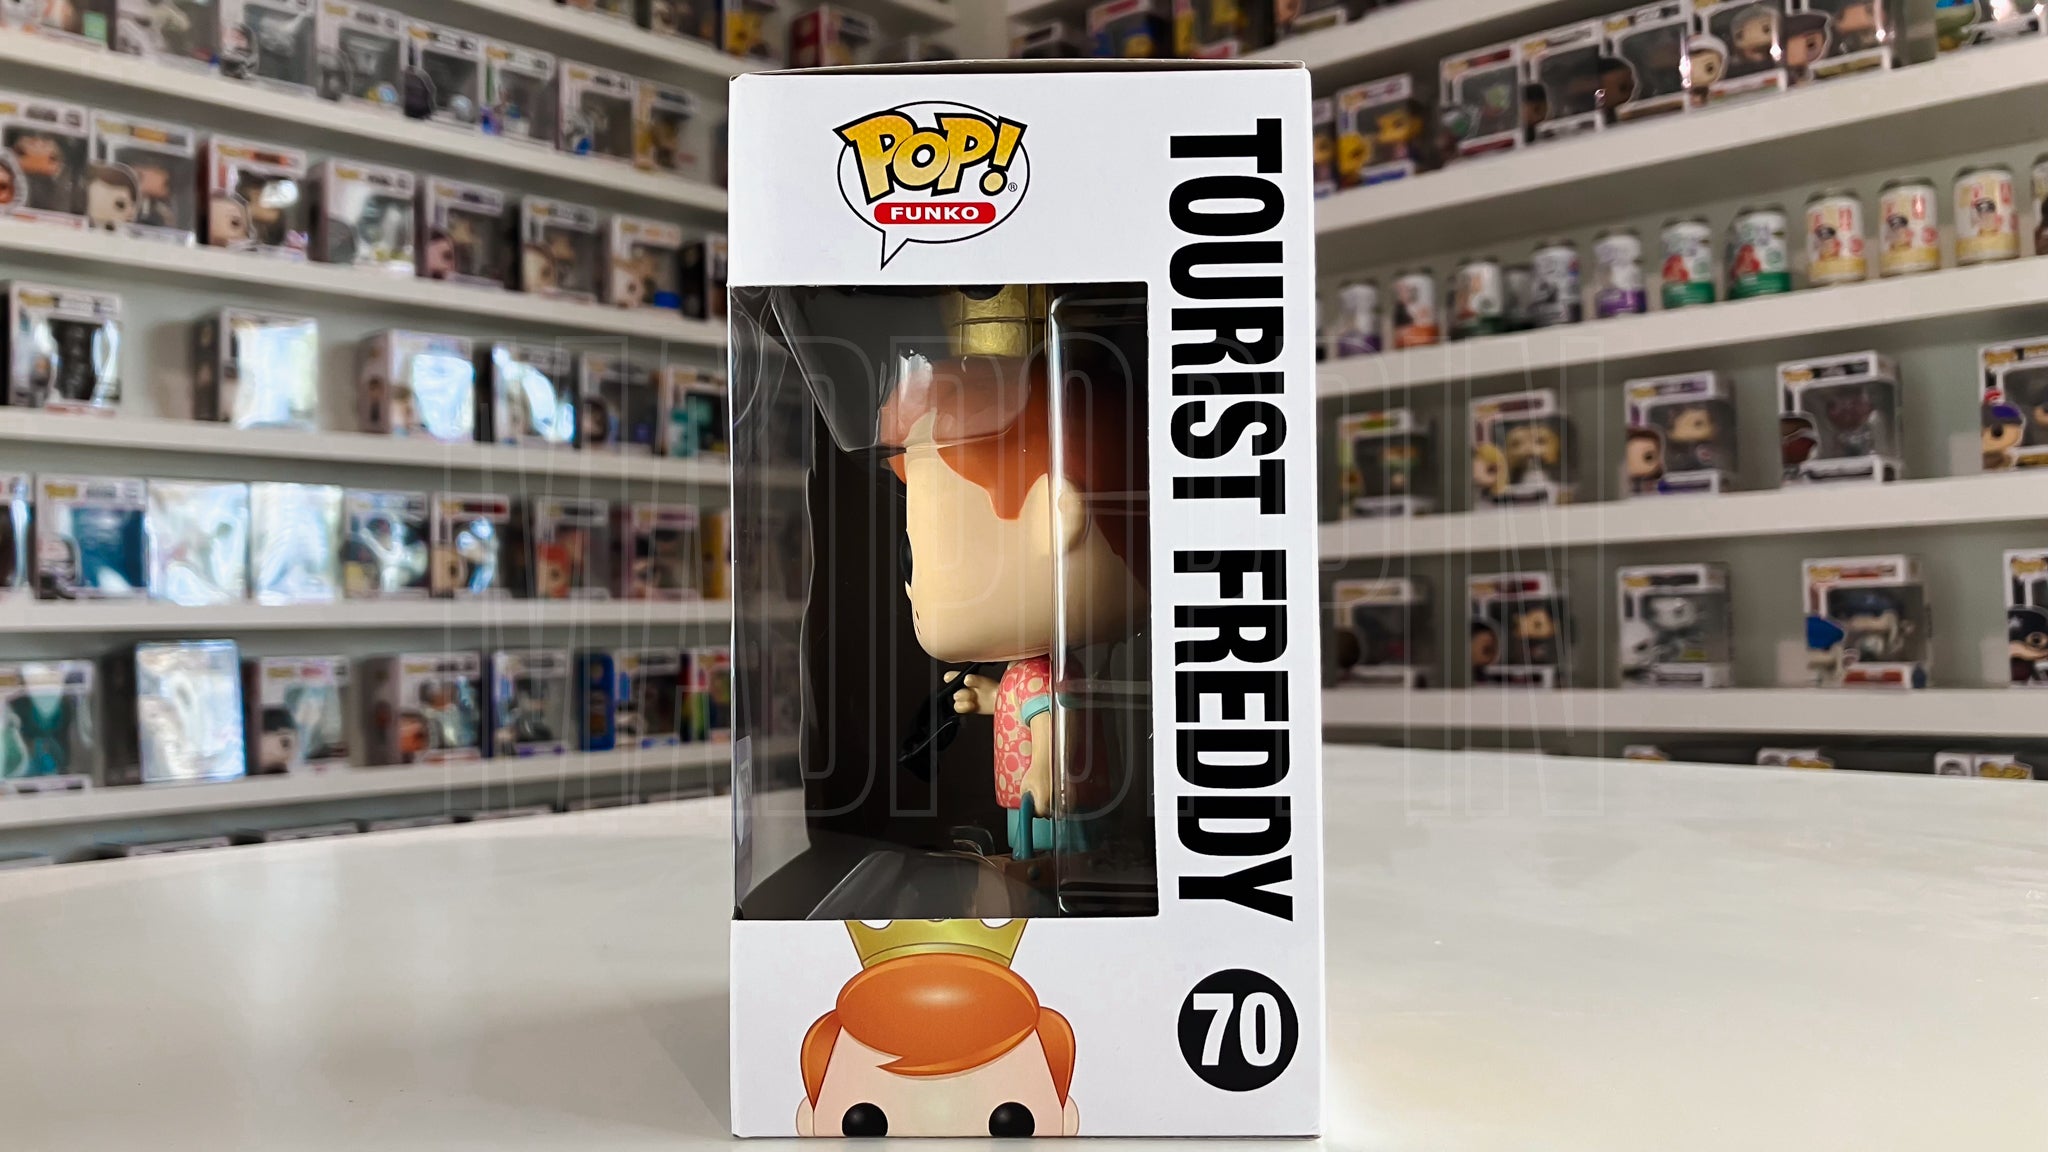 Funko Pop Funko Hollywood Tourist Freddy Limited Edition Exclusive 70